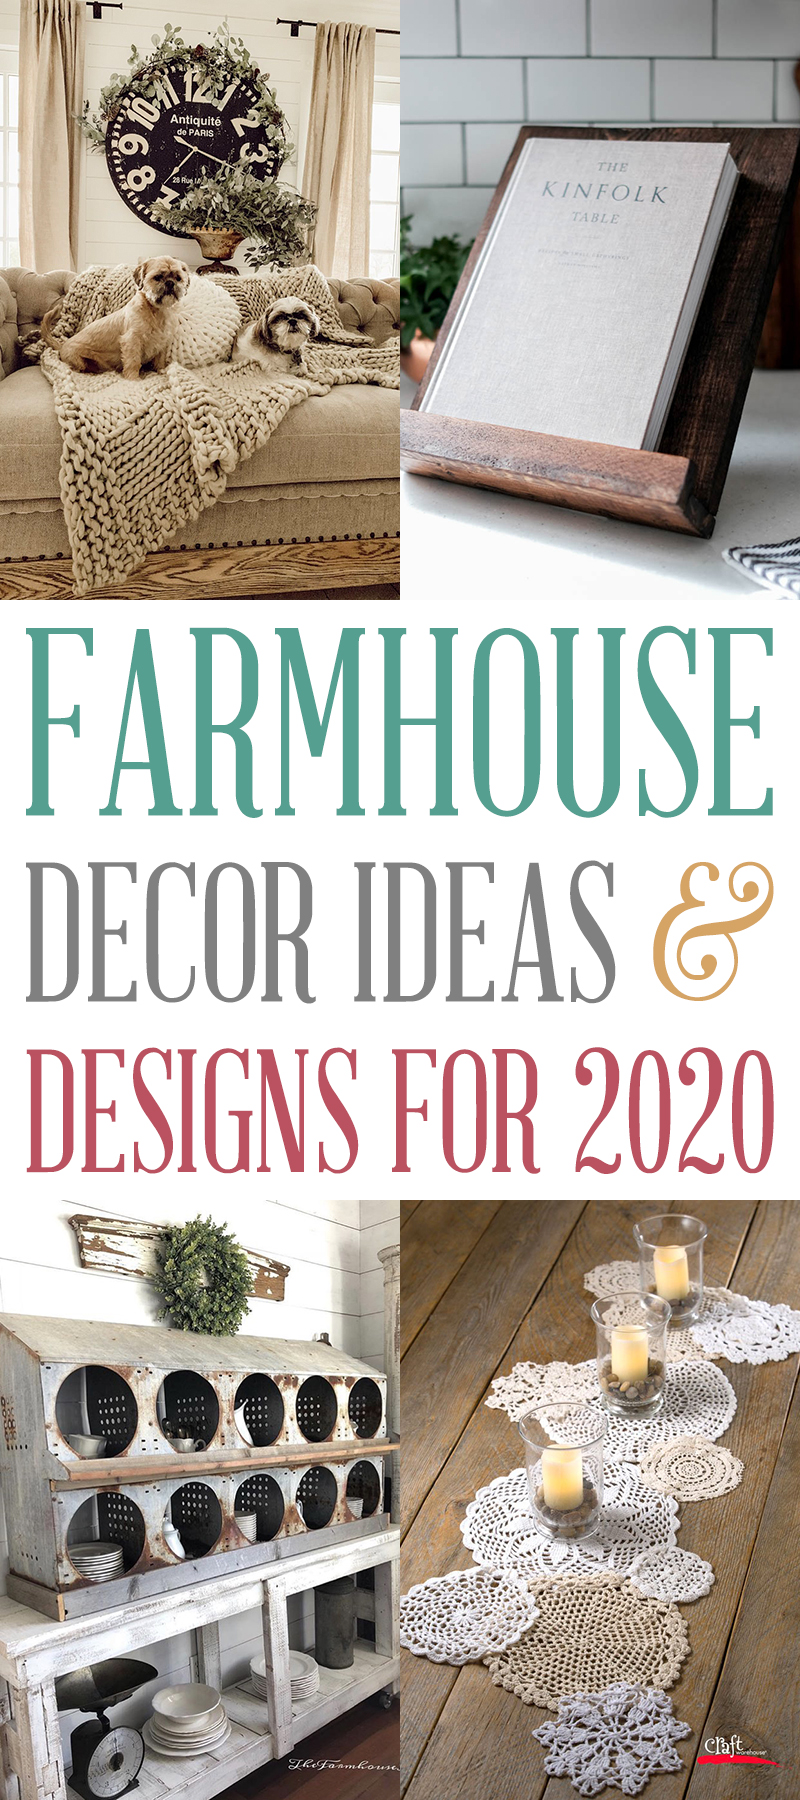 Farmhouse Decor Ideas And Designs For 2020 The Cottage Market